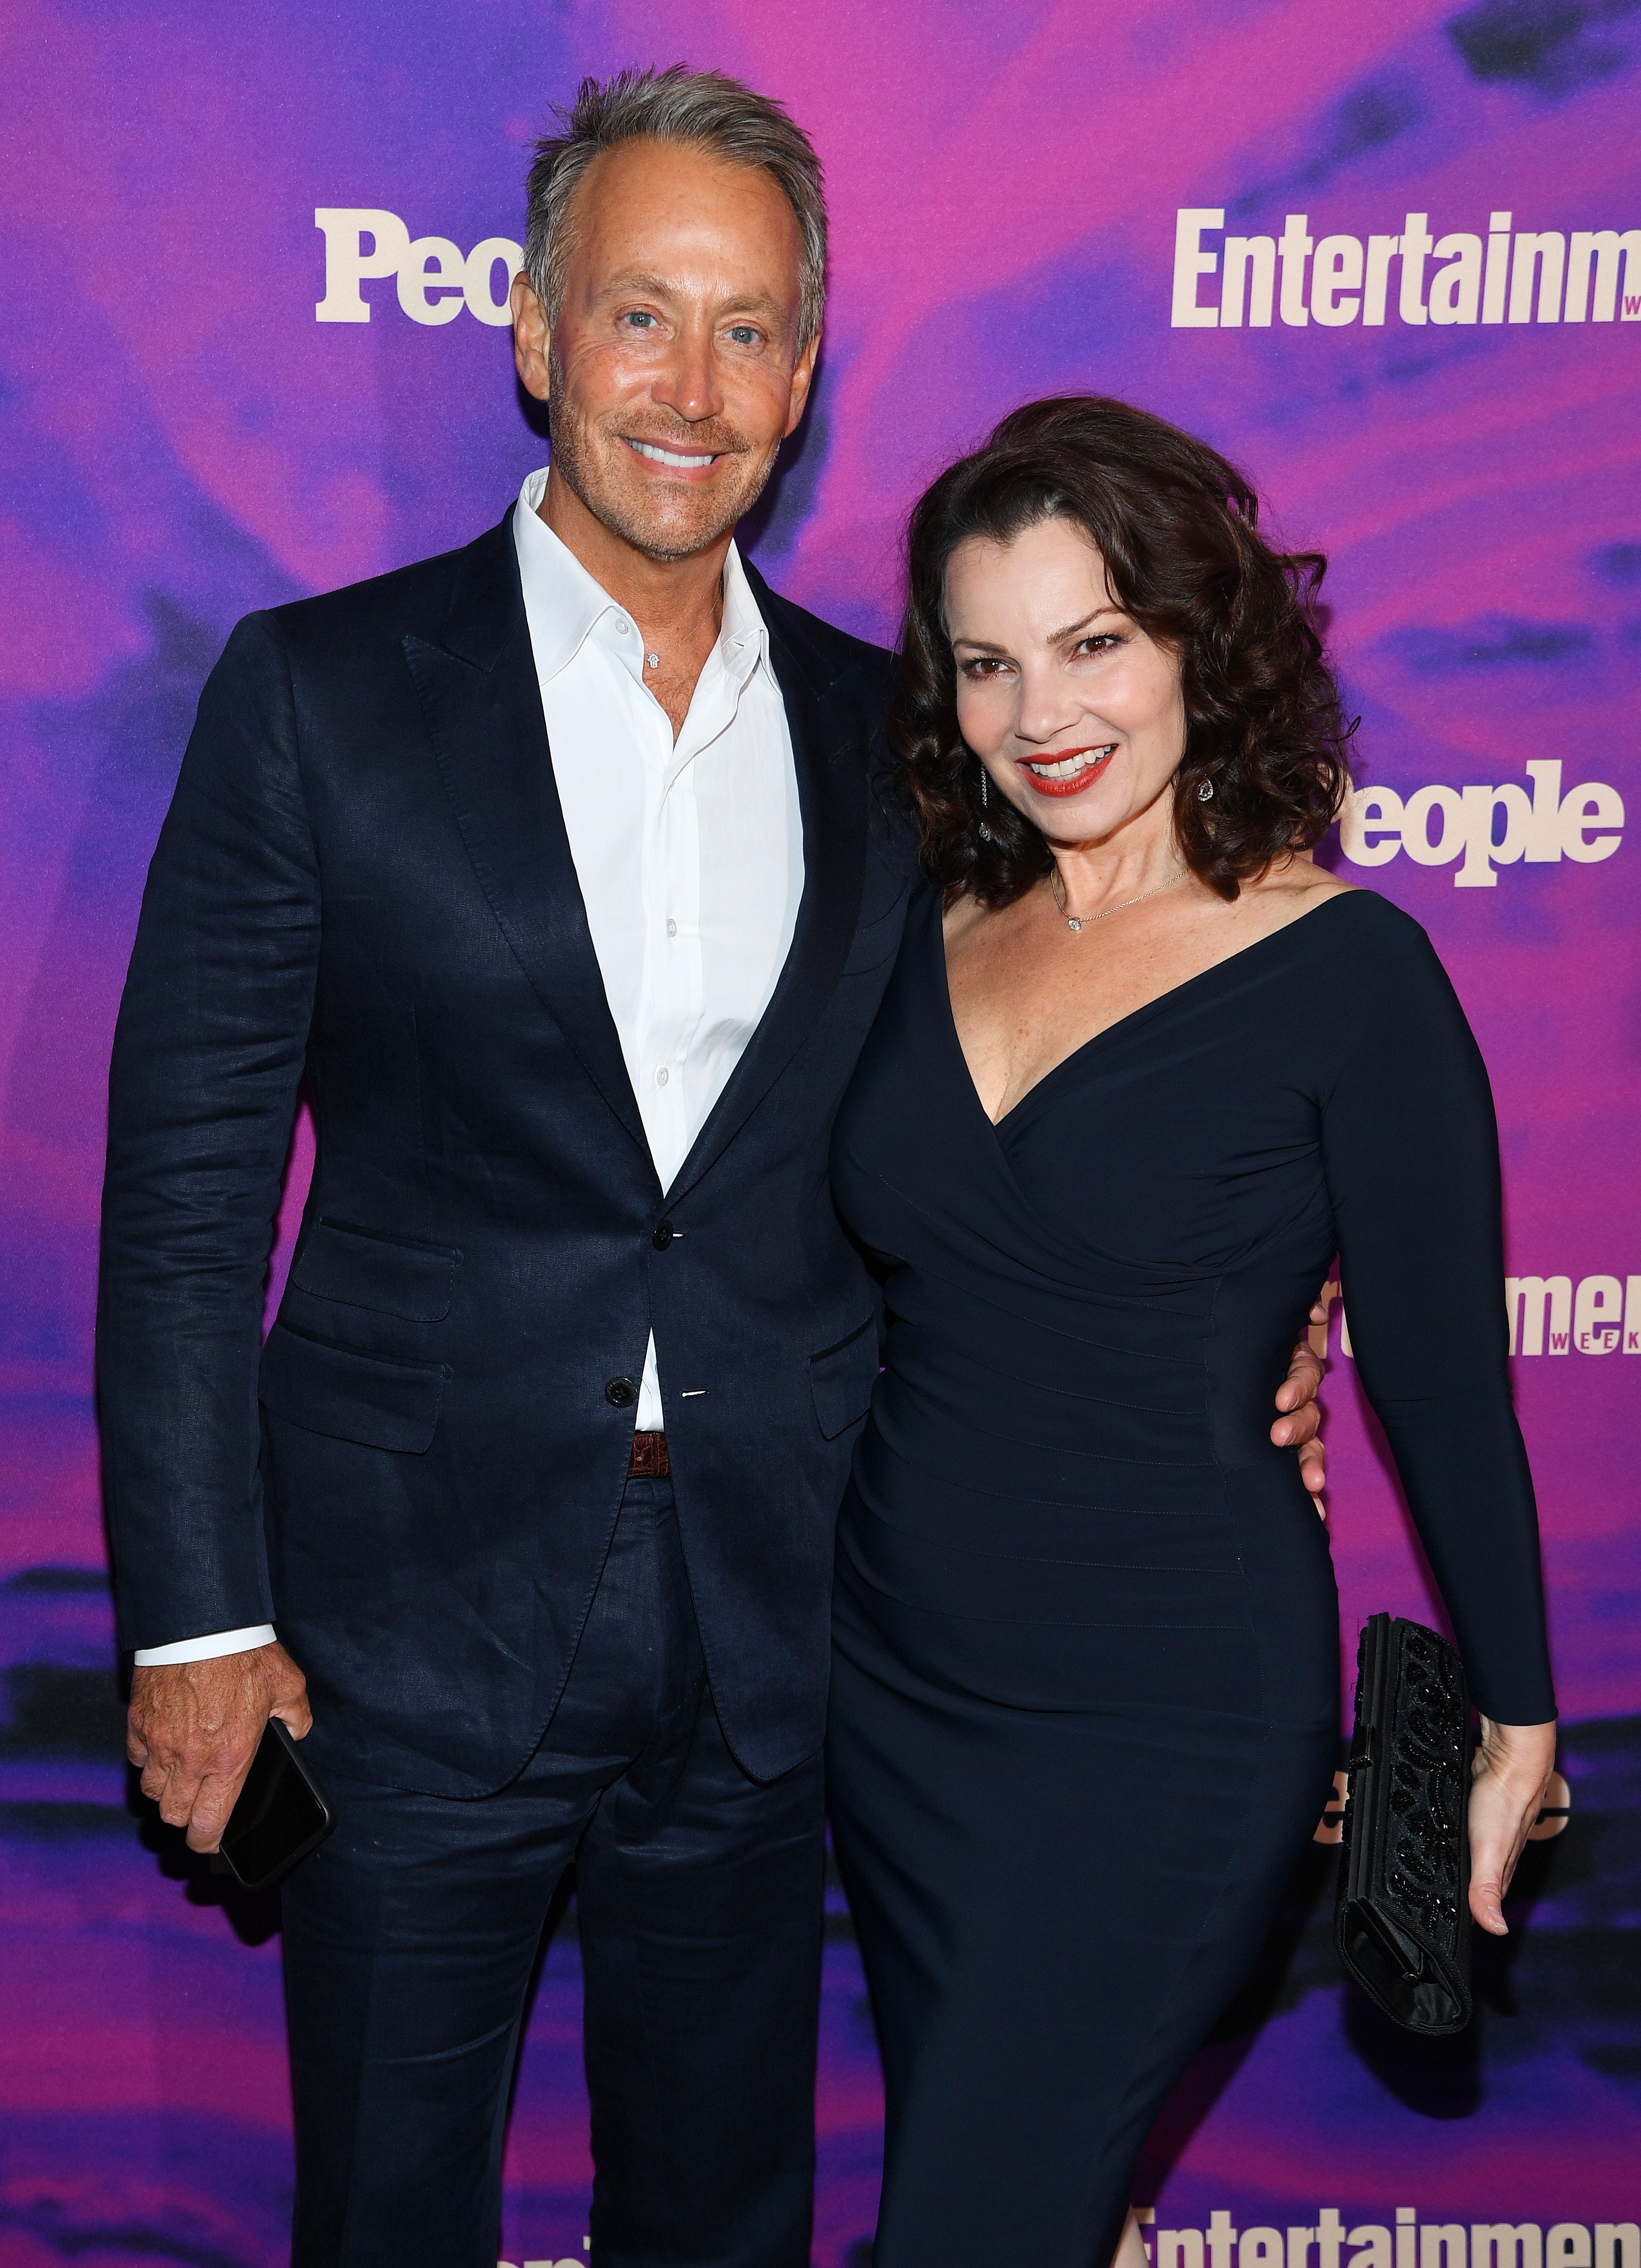 Fran Drescher and Peter Marc Jacobson attend the Entertainment Weekly & PEOPLE New York Upfronts Party on May 13, 2019, in New York City. | Source: Getty Images